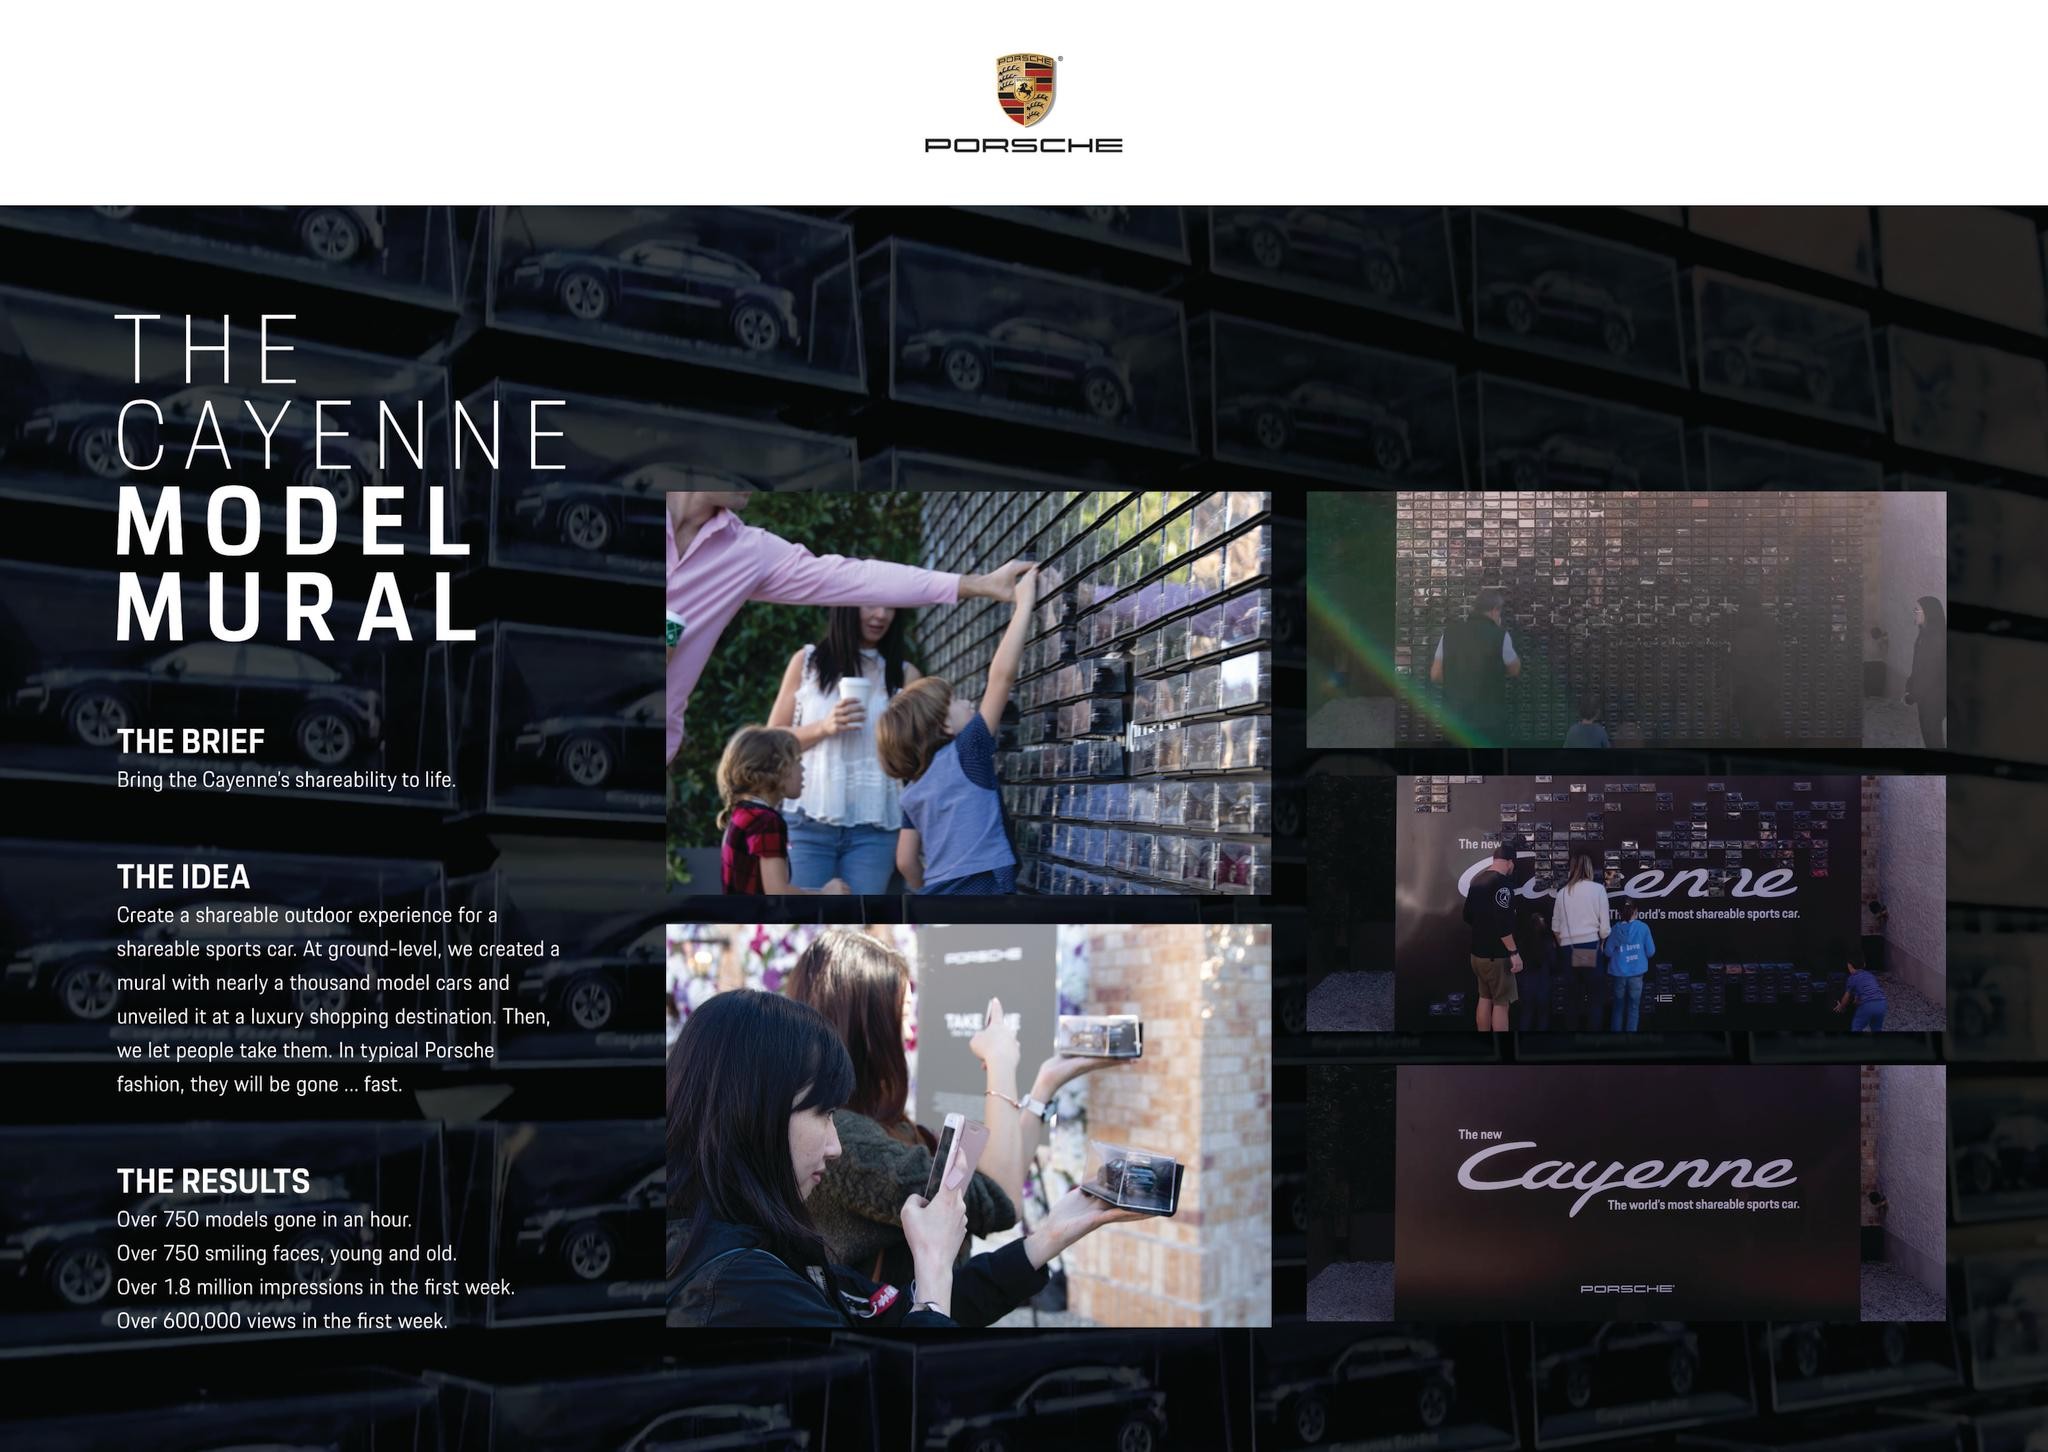 The Cayenne Model Mural